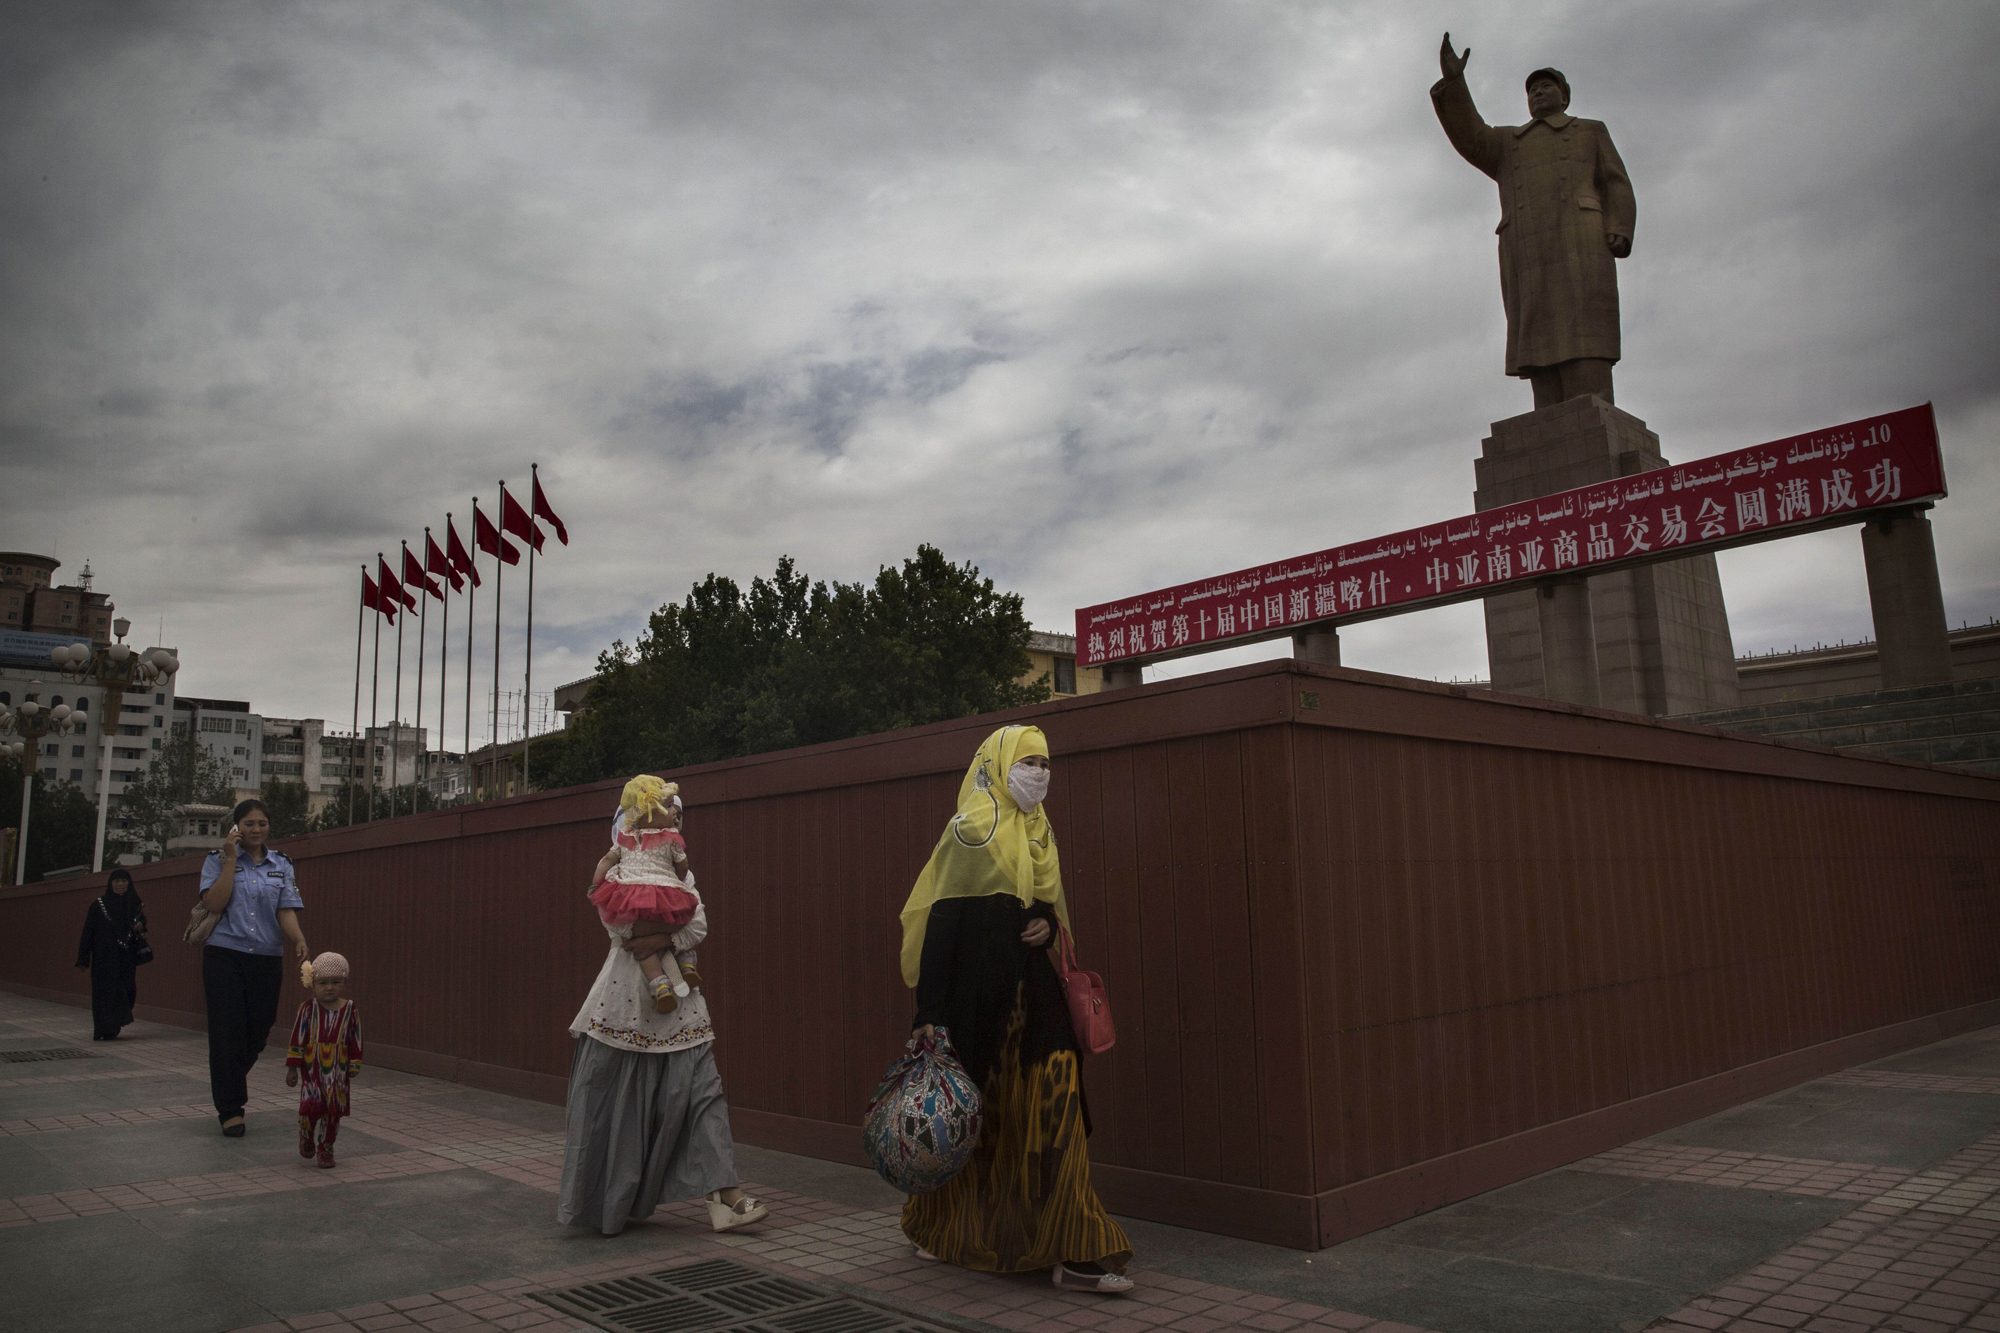 A veiled Muslim Uyghur woman walks passed a statue of Mao Zedong on July 31, 2014 in Kashgar.